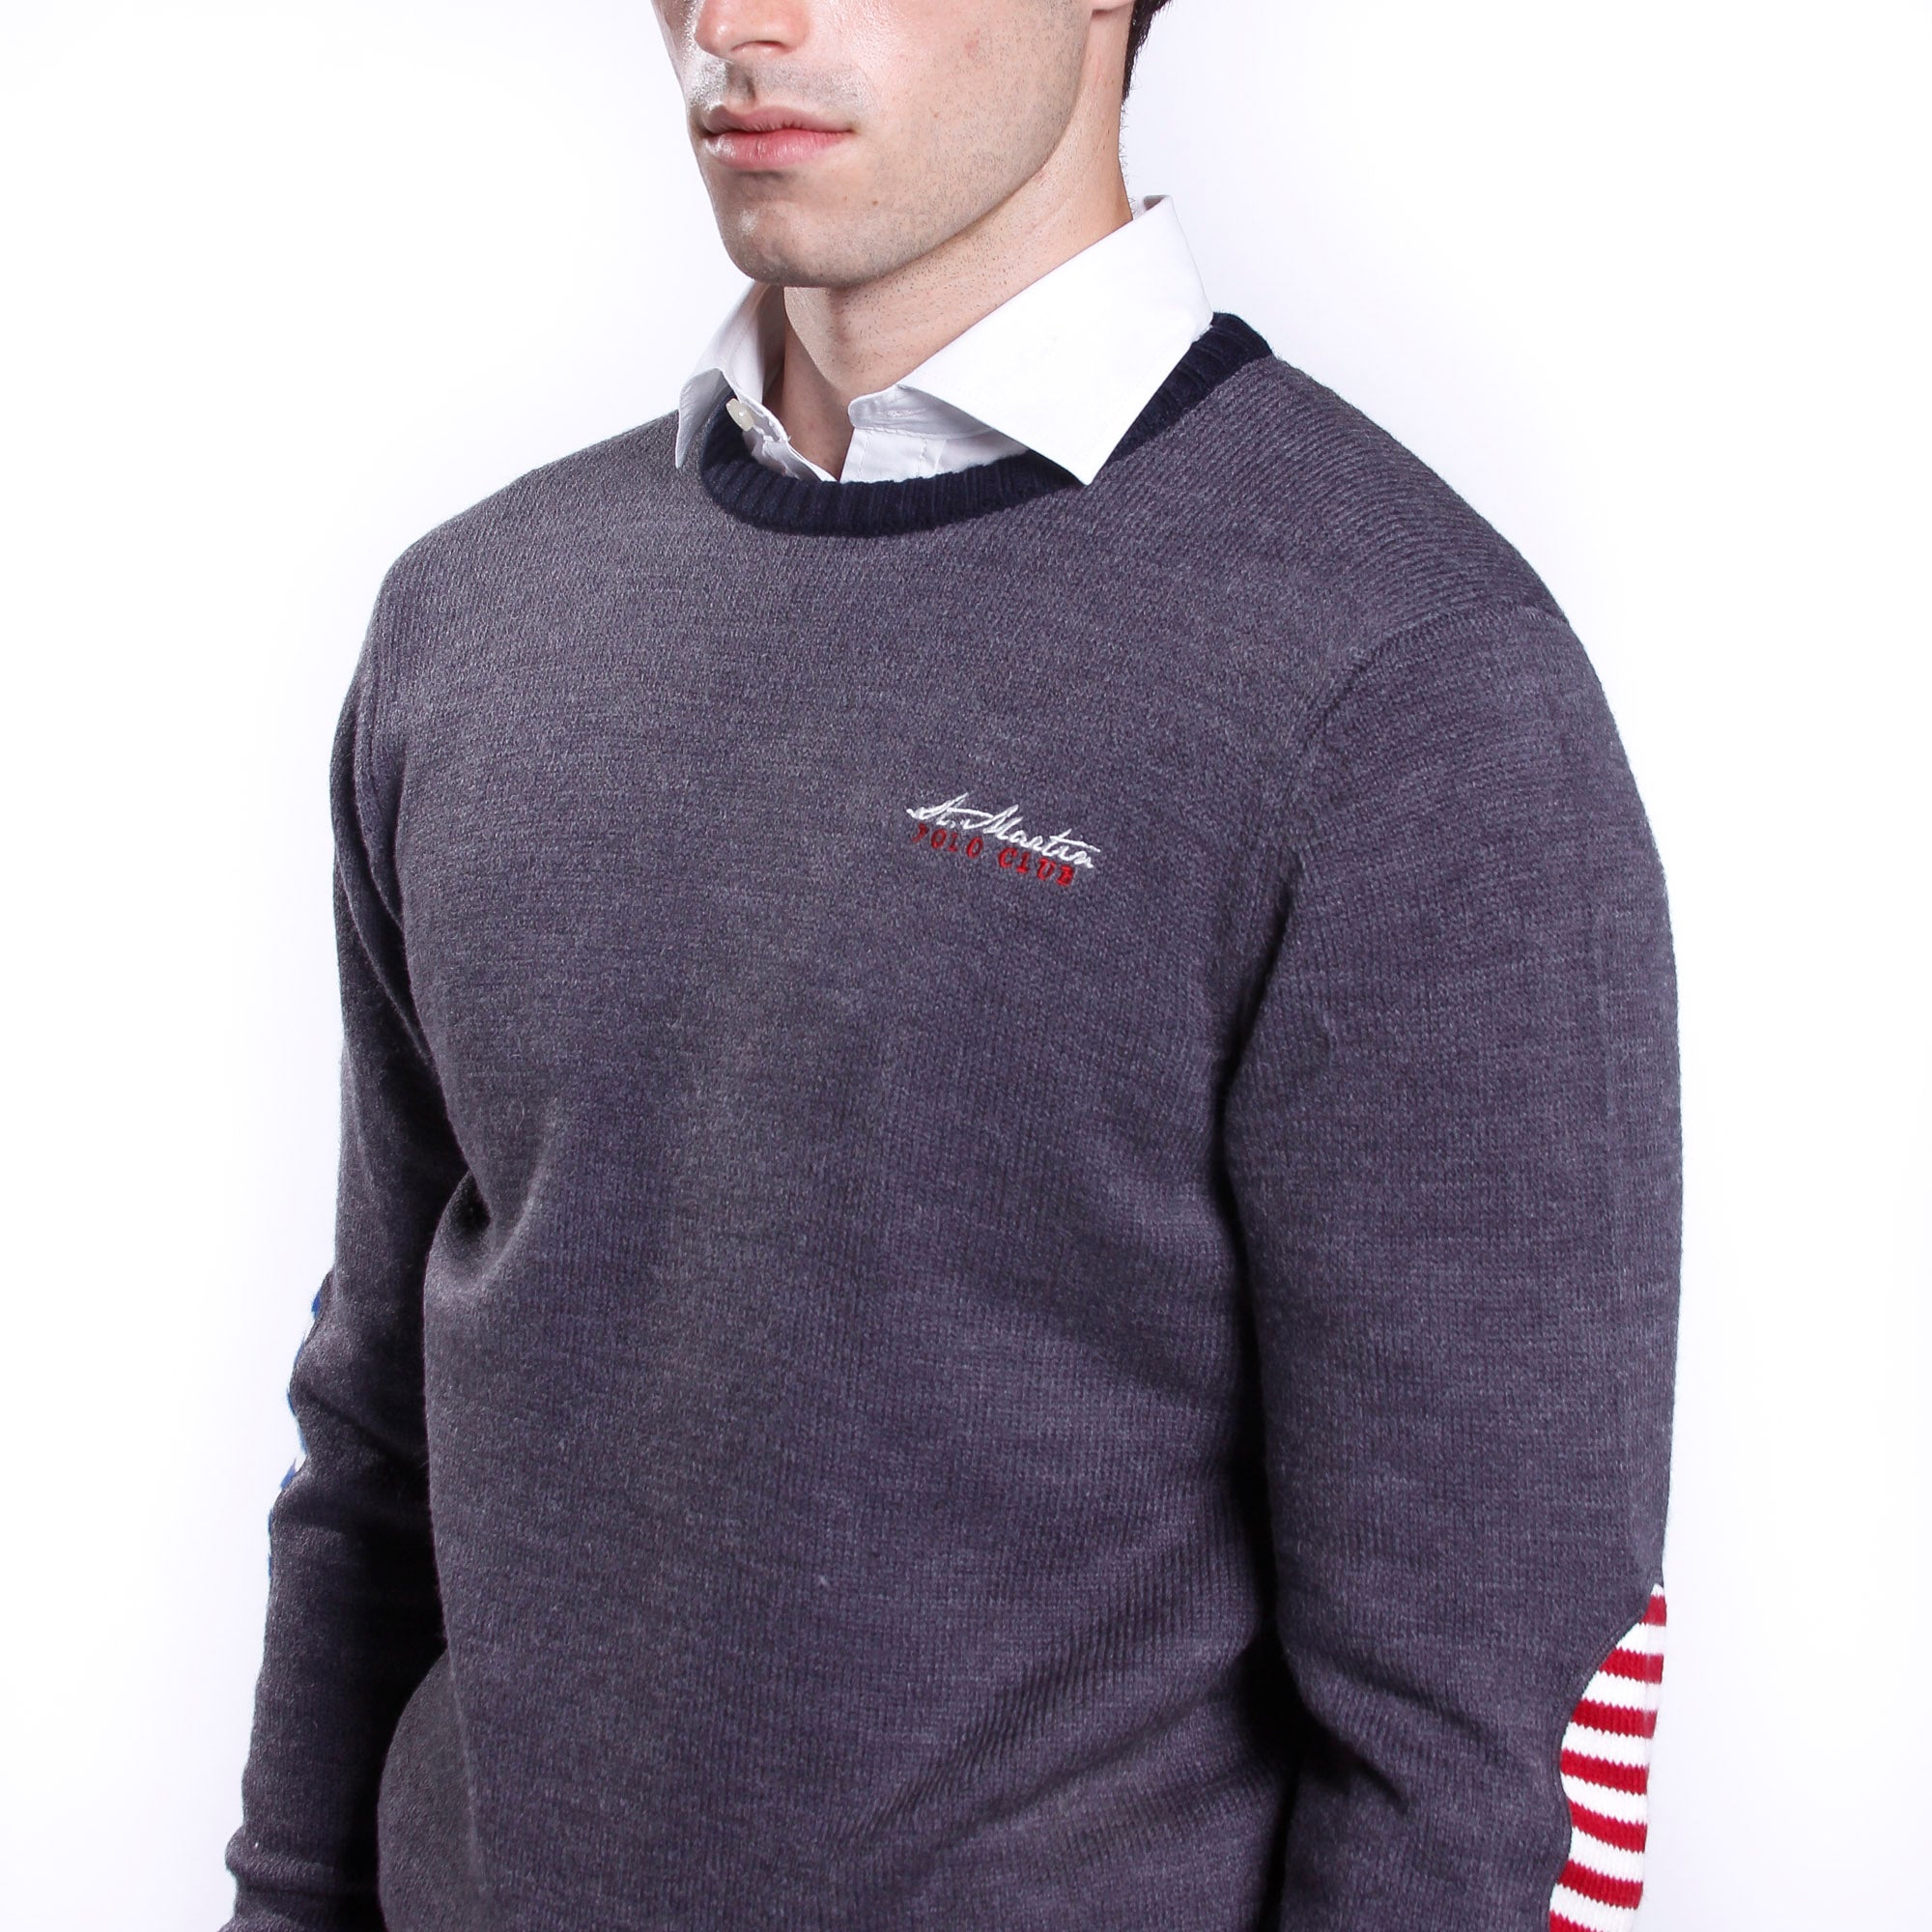 Crewneck gauge 7 with patches on sleeve col. and logo embroidery